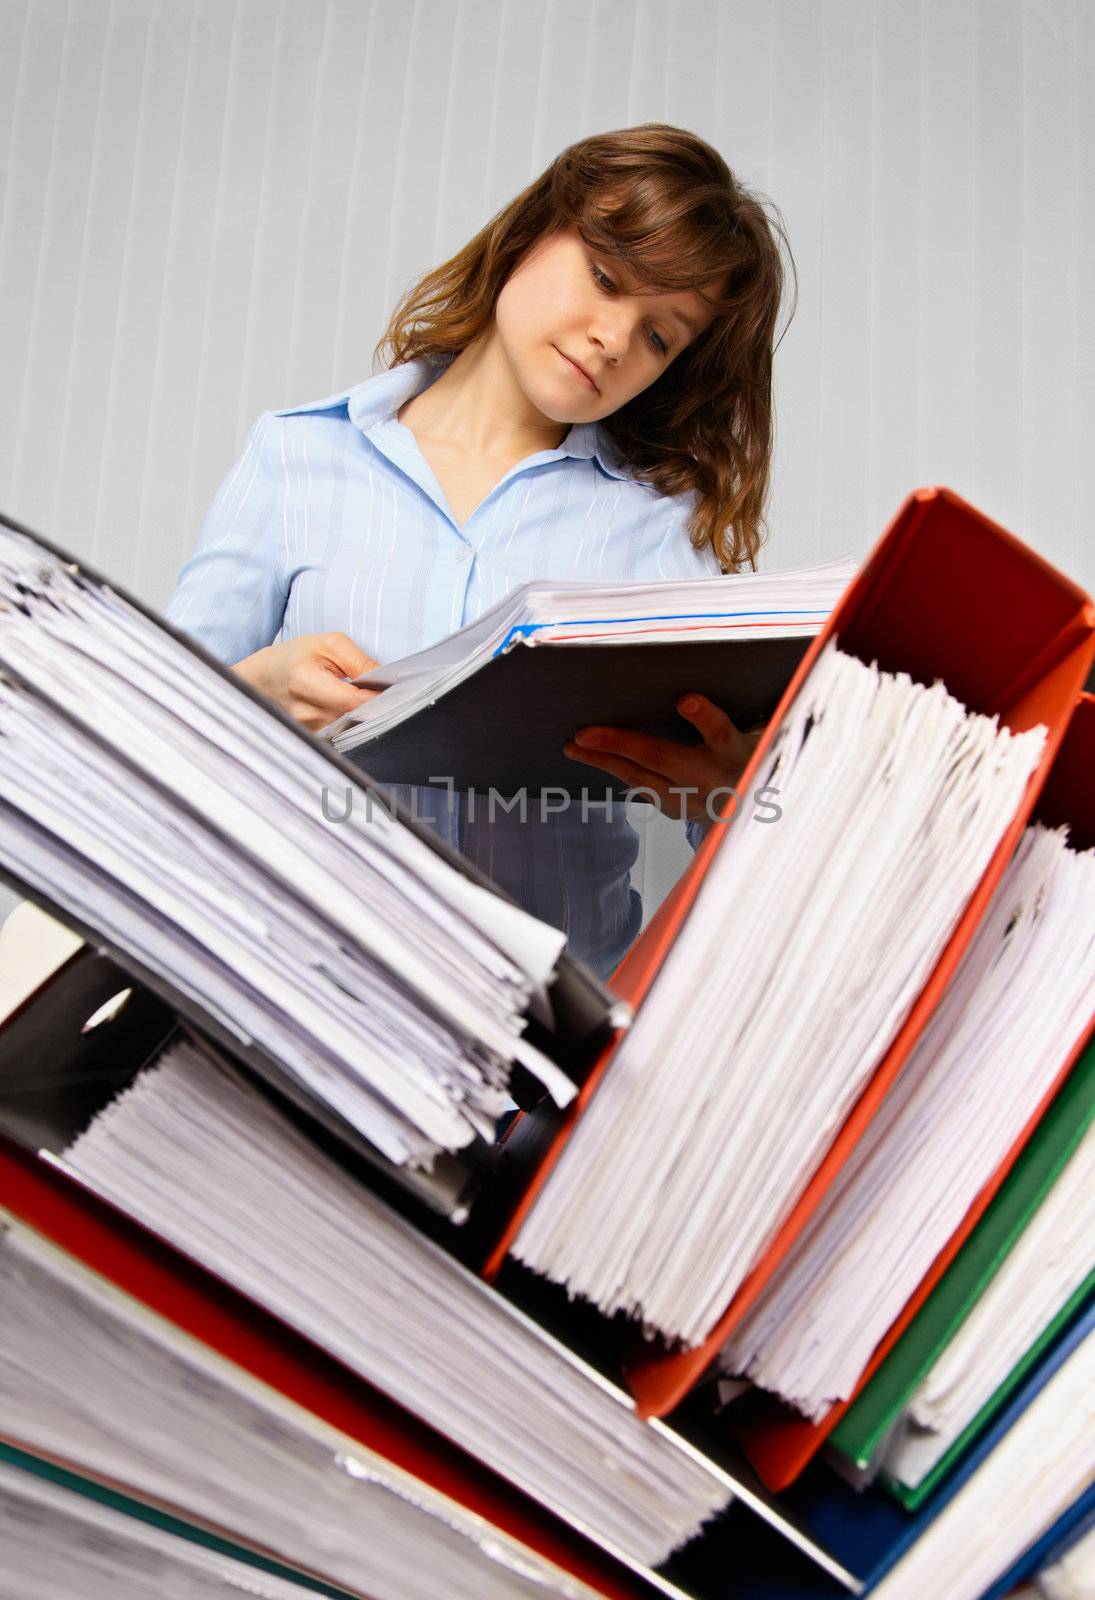 Accountant and business documents - preparing for inspection